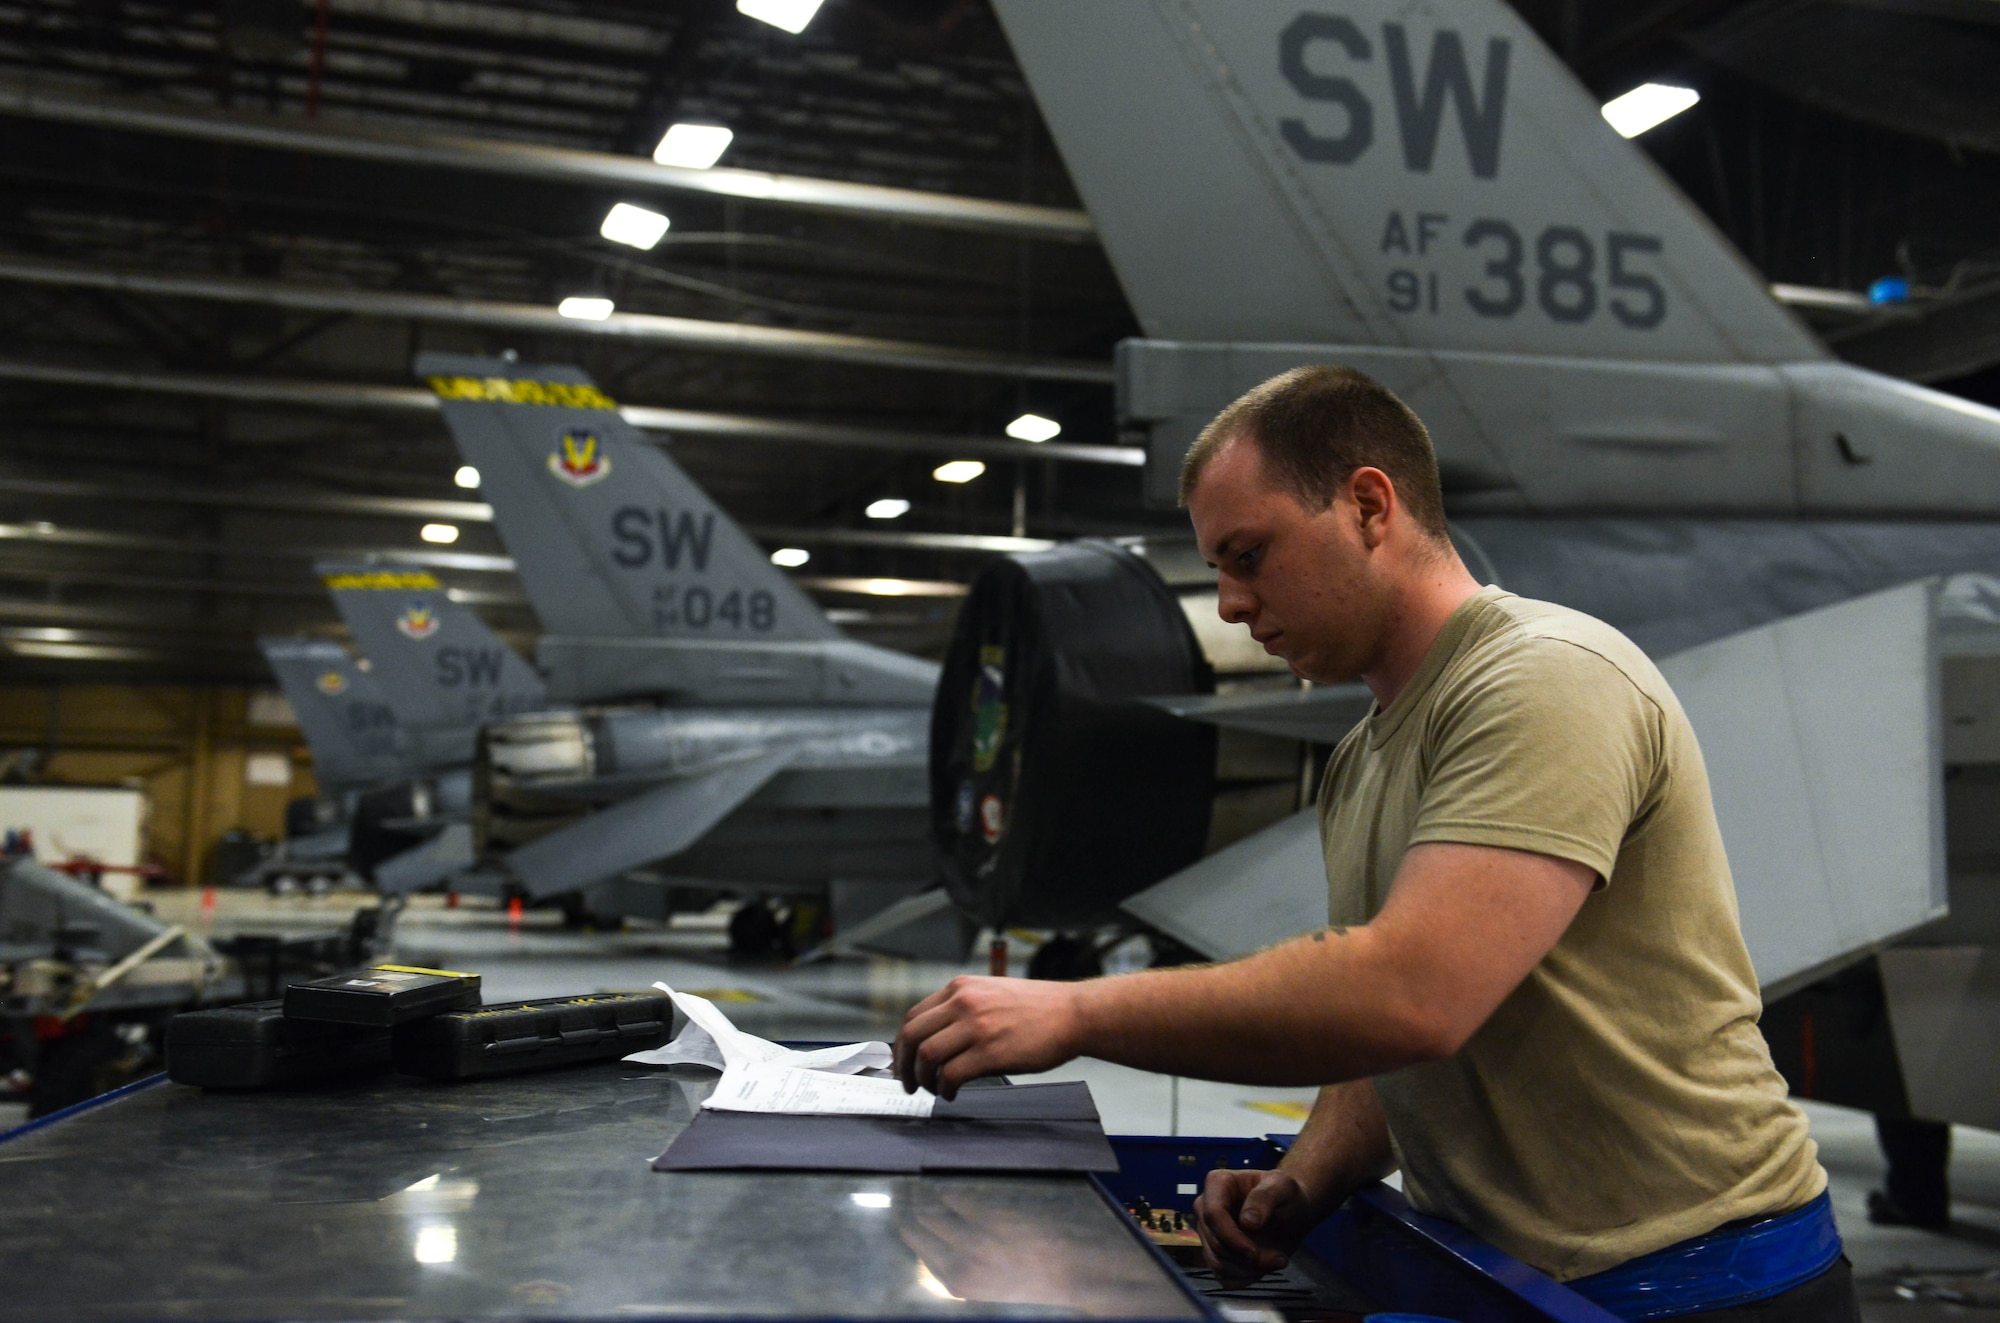 U.S. Air Force Airman 1st Class Ryan Cassidy, 20th Aircraft Maintenance Squadron tactical aircraft maintainer, looks through a toolbox log at Shaw Air Force Base, S.C., April 13, 2017. Tactical aircraft maintainers use logs to keep accountability of tools at all times. (U.S. Air Force photo by Airman 1st Class Destinee Sweeney)